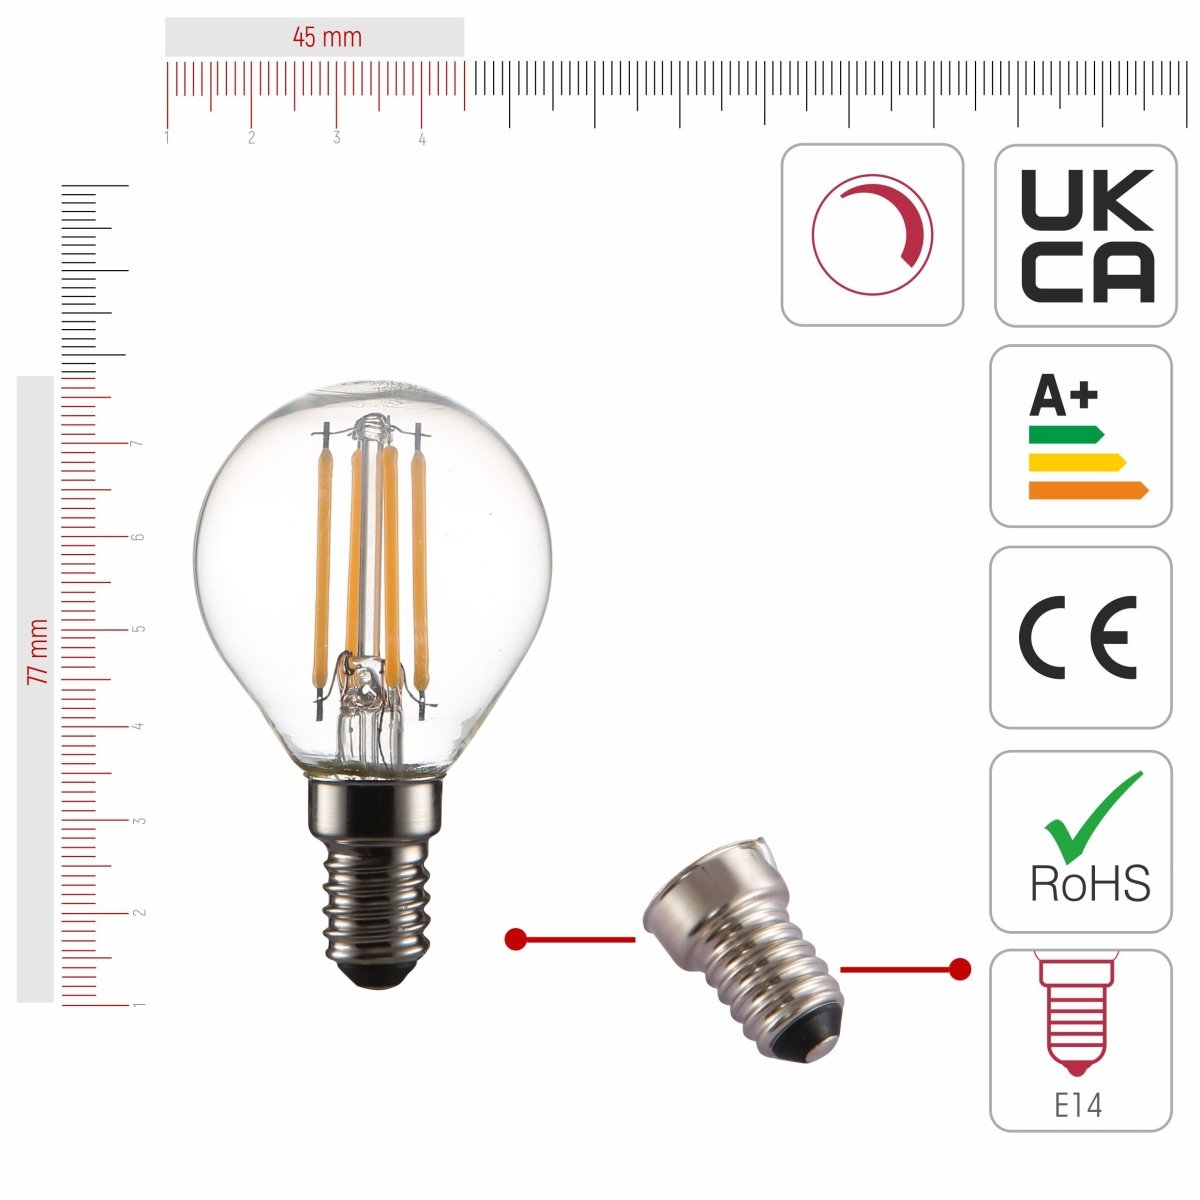 Size and certifications of LED Dimmable Filament Bulb P45 Golf Ball E14 Small Edison Screw 4W 470lm Warm White 2700K Clear Pack of 4 | TEKLED 583-150224